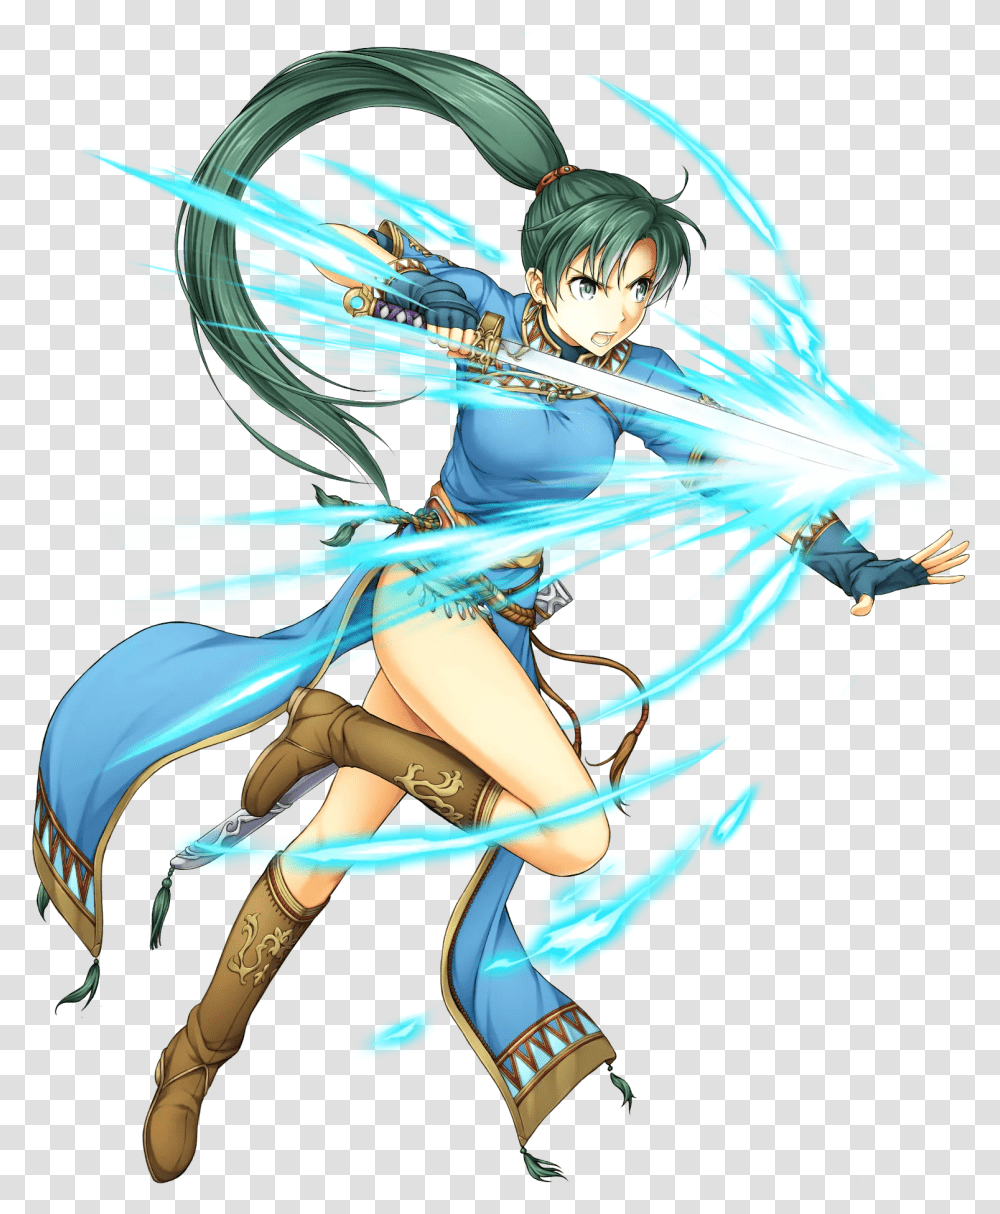 Download Artwork Lyn From Fire Emblem Image With No Lyn Fire Emblem Heroes, Manga, Comics, Book, Person Transparent Png